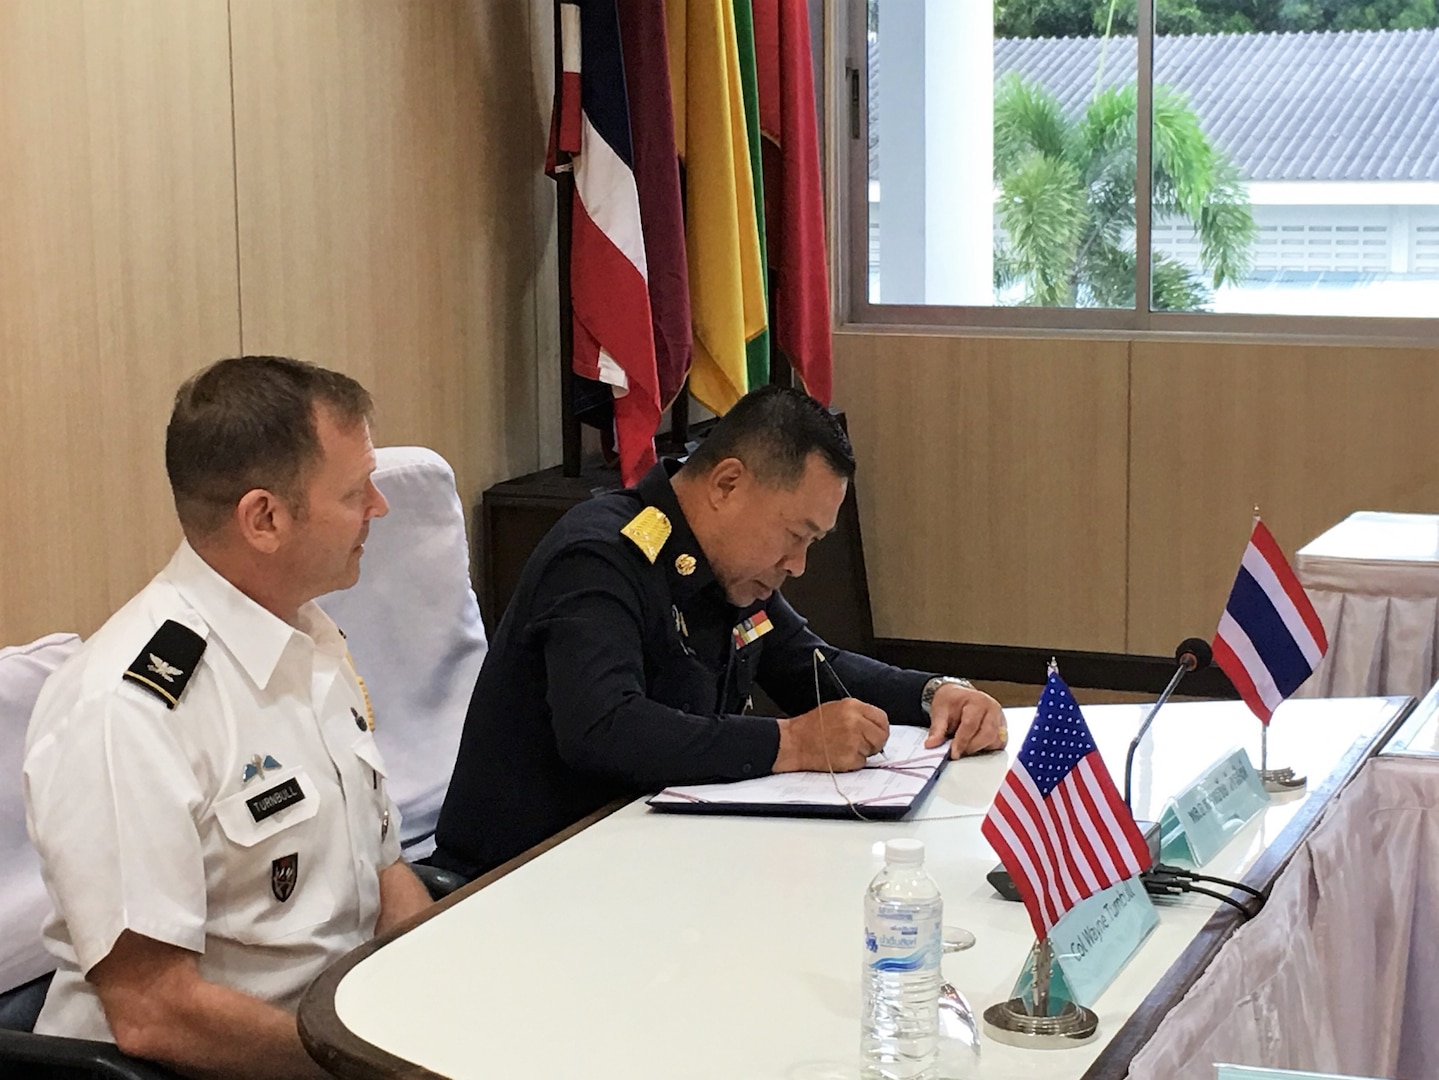 Royal Thailand Air Force Air Marshal Yuttachai Watcharasing (right) signs an agreement for space situational awareness services and data as U.S. Army Col. Wayne Turnbull, senior defense official and defense attaché to Thailand, witnesses the signing, Oct. 1, 2018, in Thailand. Agreements like these bolsters the United States and Thailand’s awareness in the space domain. (Courtesy Photo)